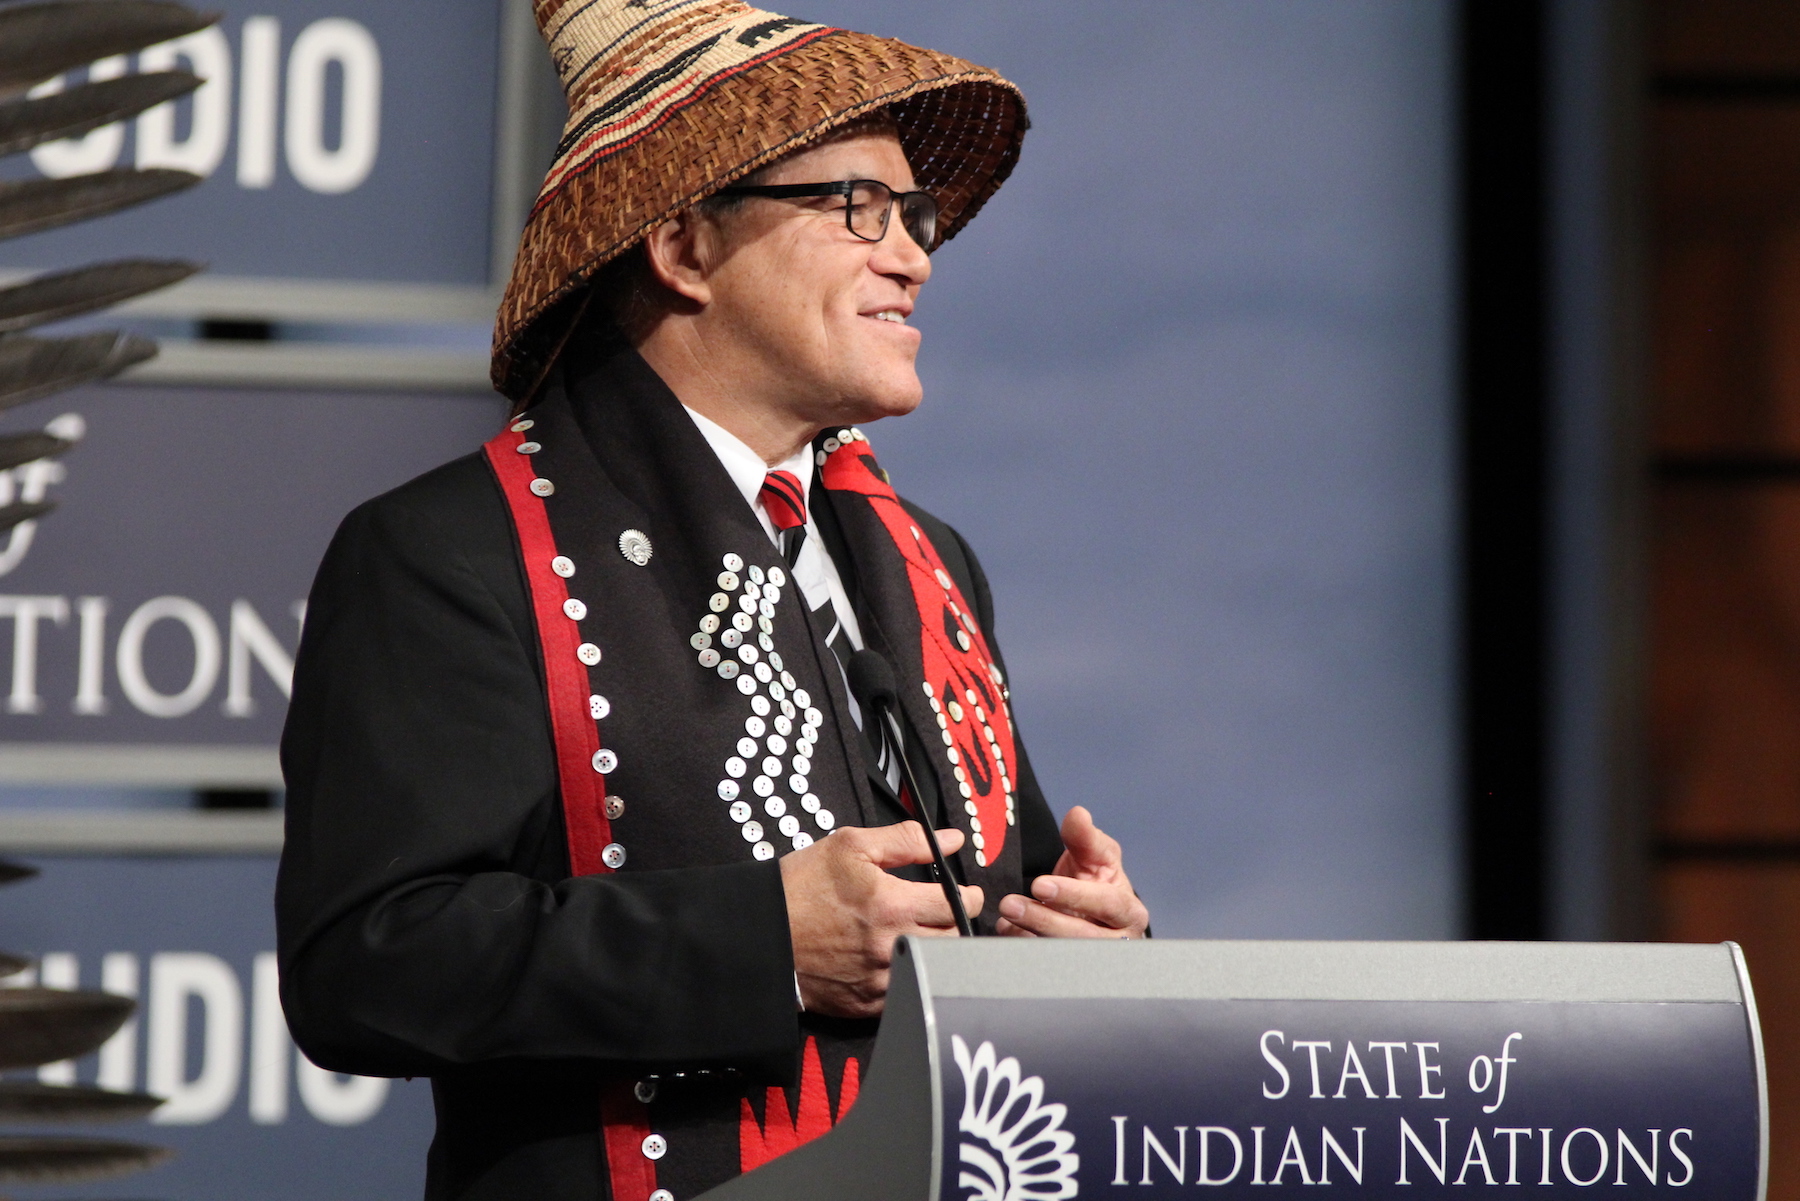 First State of Indian Nations address in the new Donald Trump era